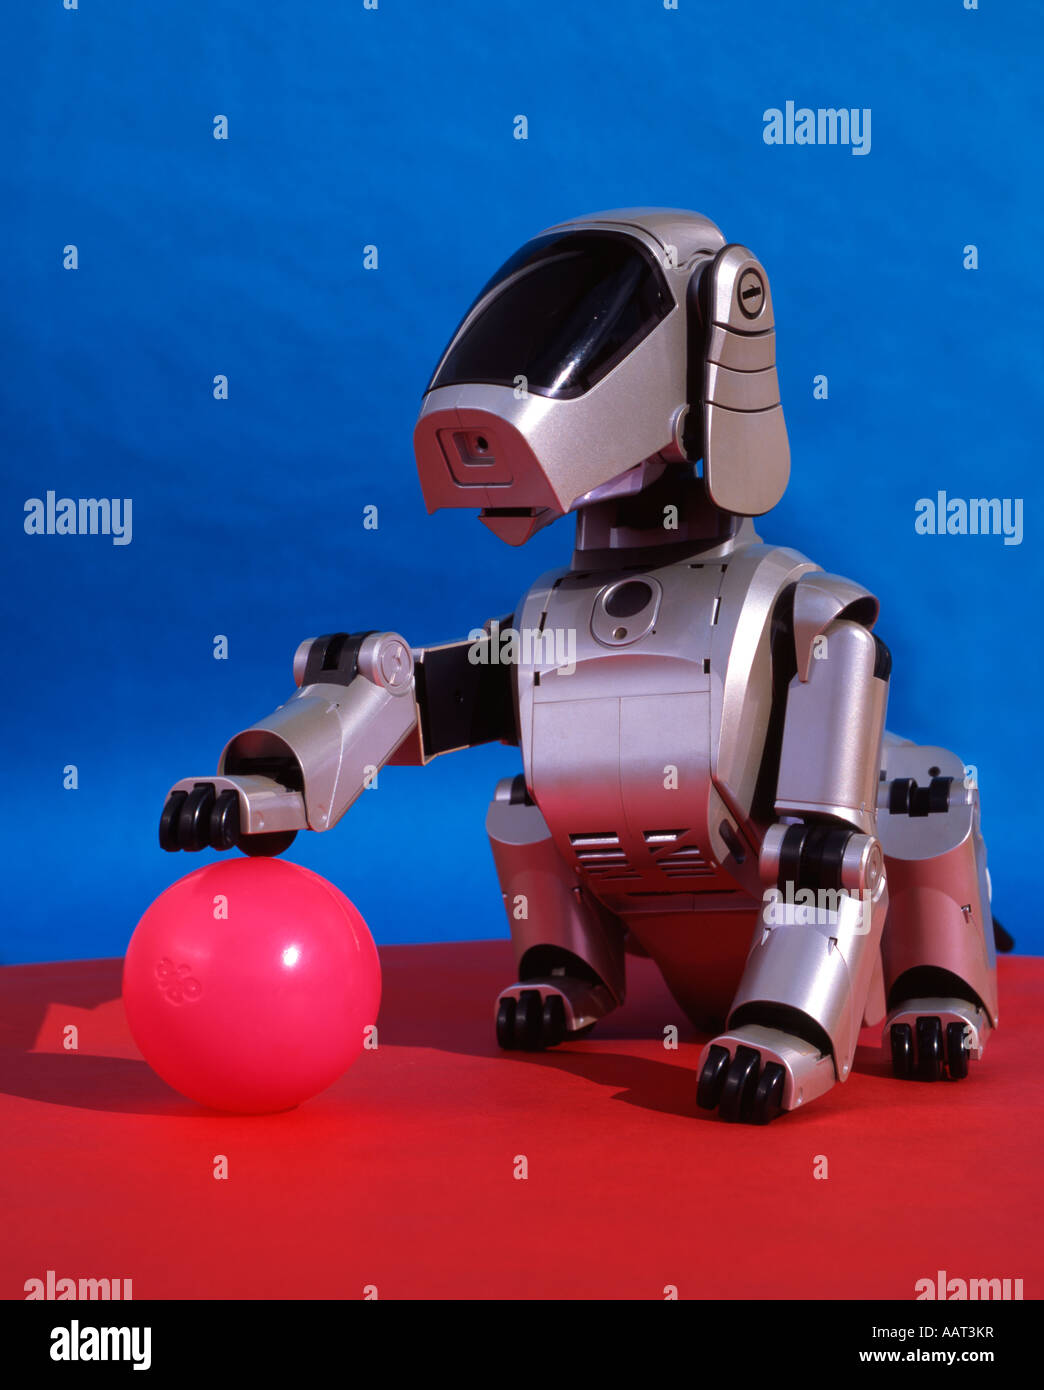 Sony AIBO ( Artificial Intelligence roBOt ) autonomous robot, First generation model ( ERS-110 ERS-111 ) with pink ball Stock Photo